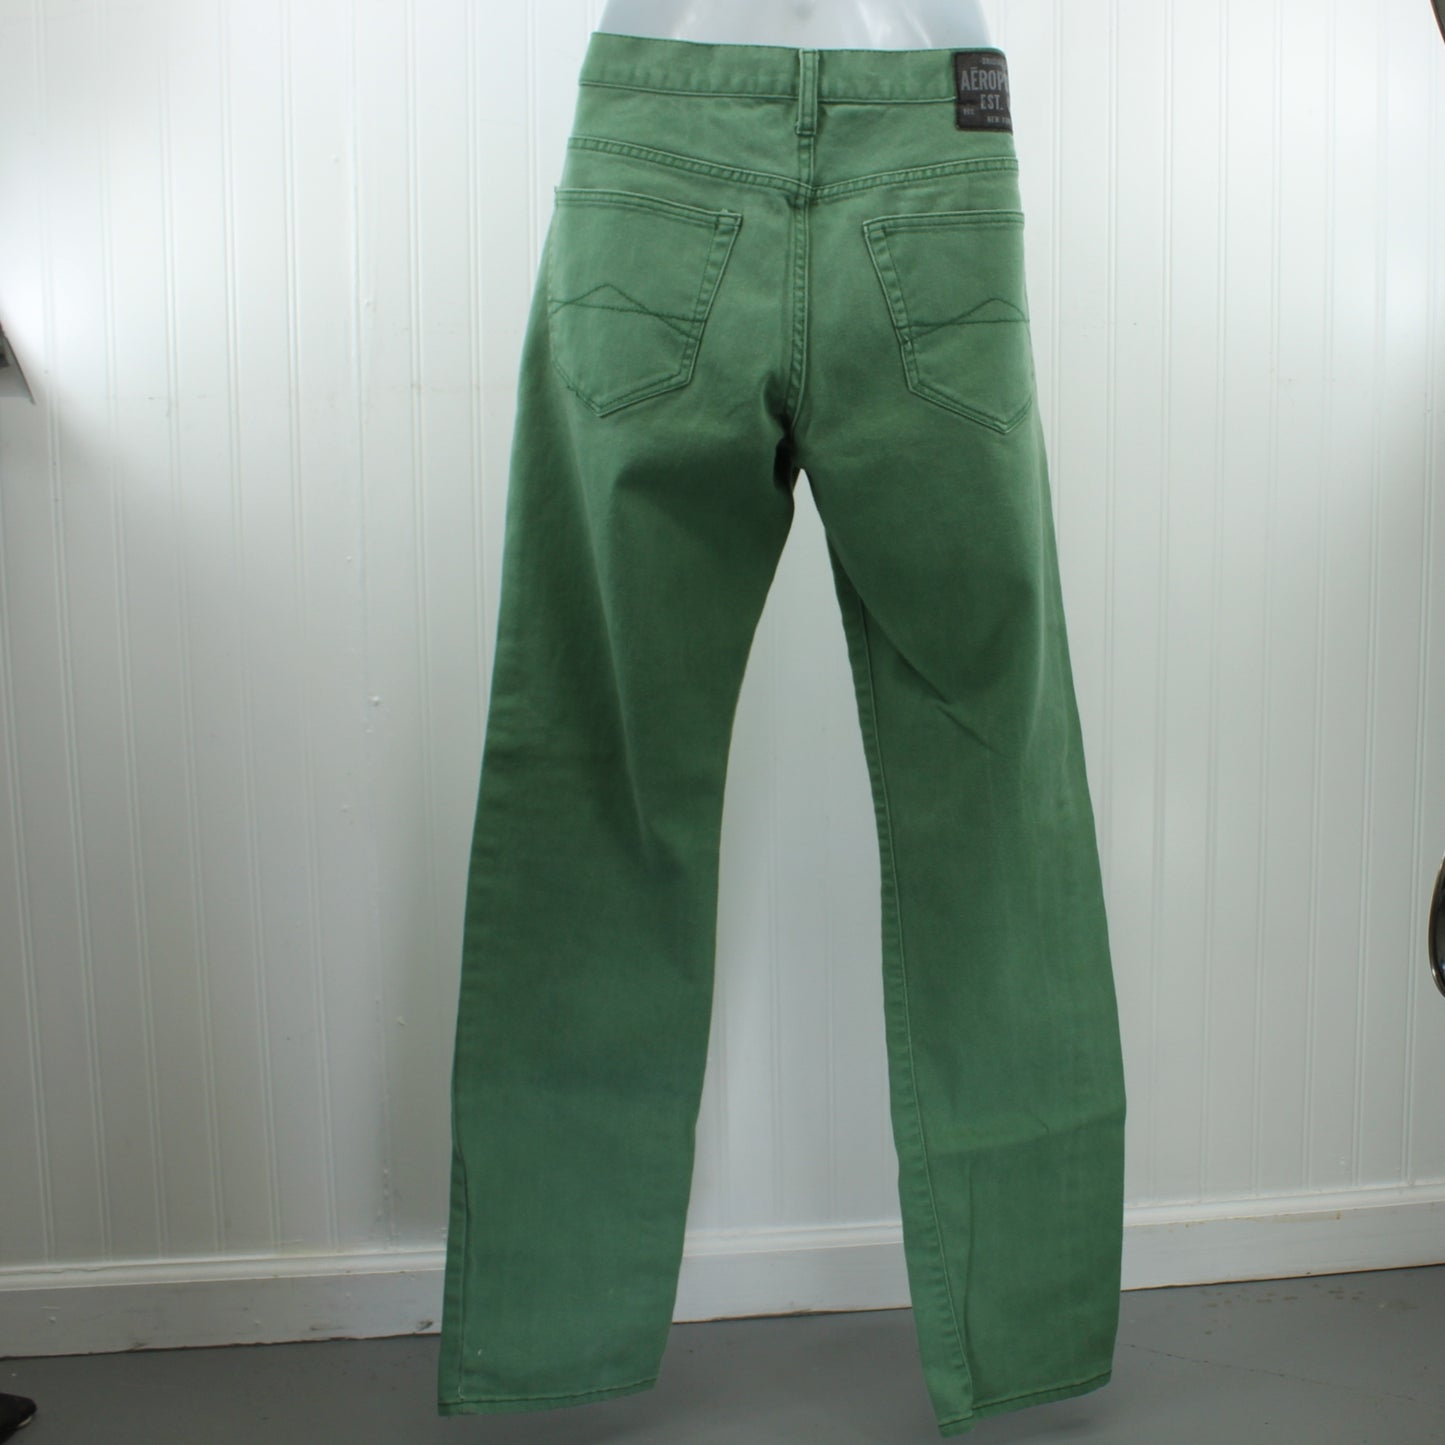 Aeropostale Bowery Vintage Slim Straight Jeans Green Cotton 98% Spandex 2% Size 32/34 great green color